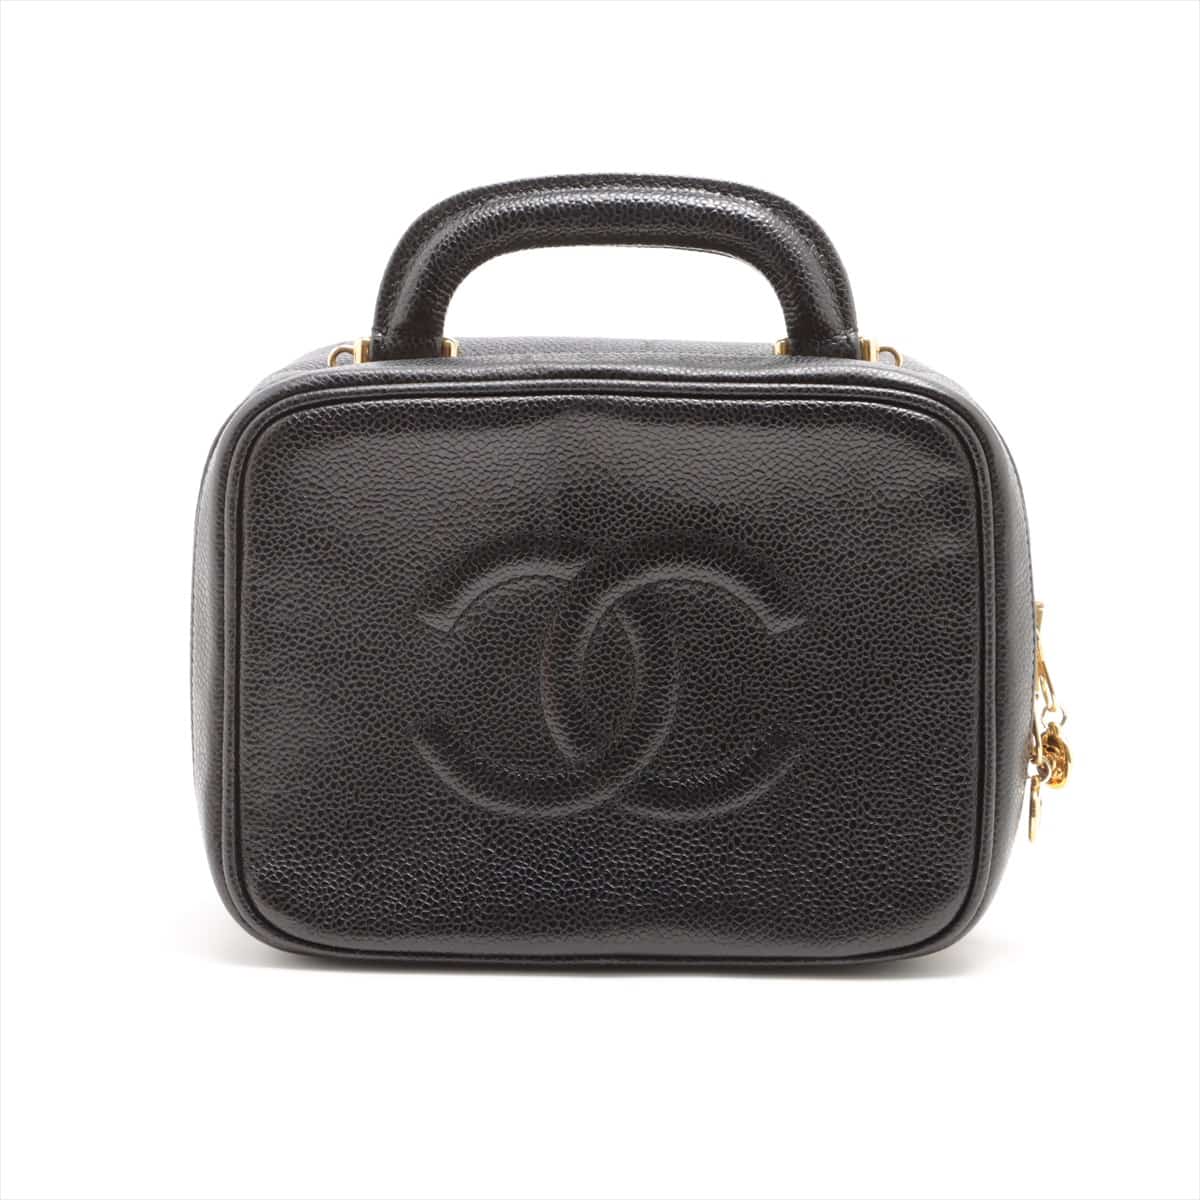 Chanel Coco Mark Caviarskin Vanity bag Black Gold Metal fittings 4XXXXXX A07060 with pouch